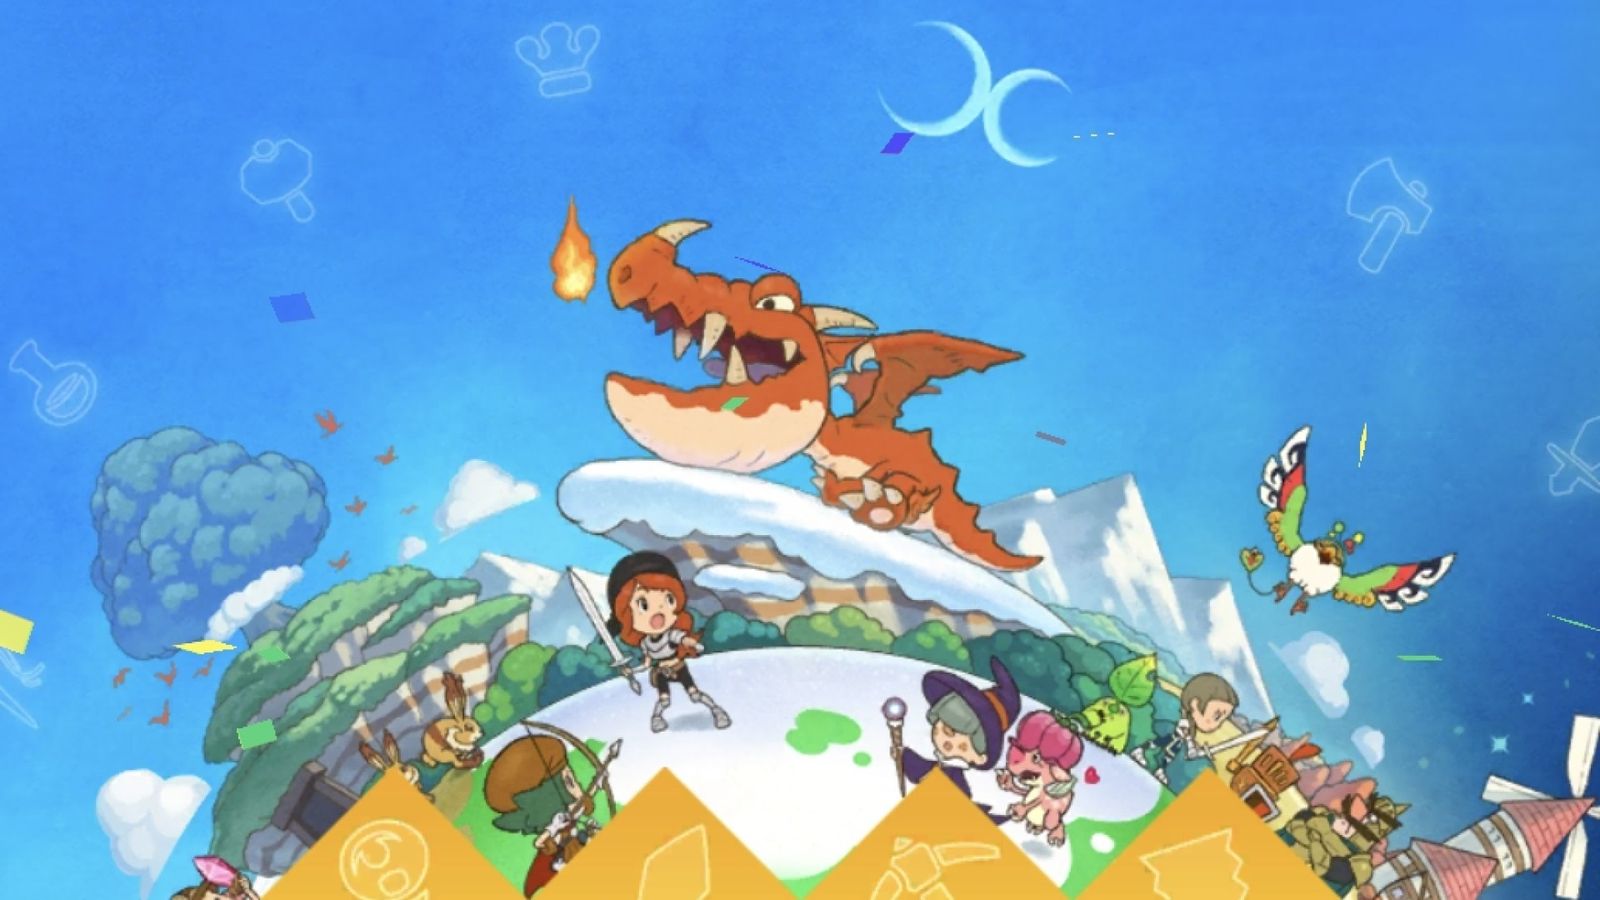 Characters from Fantasy Life Online fighting a dragon.